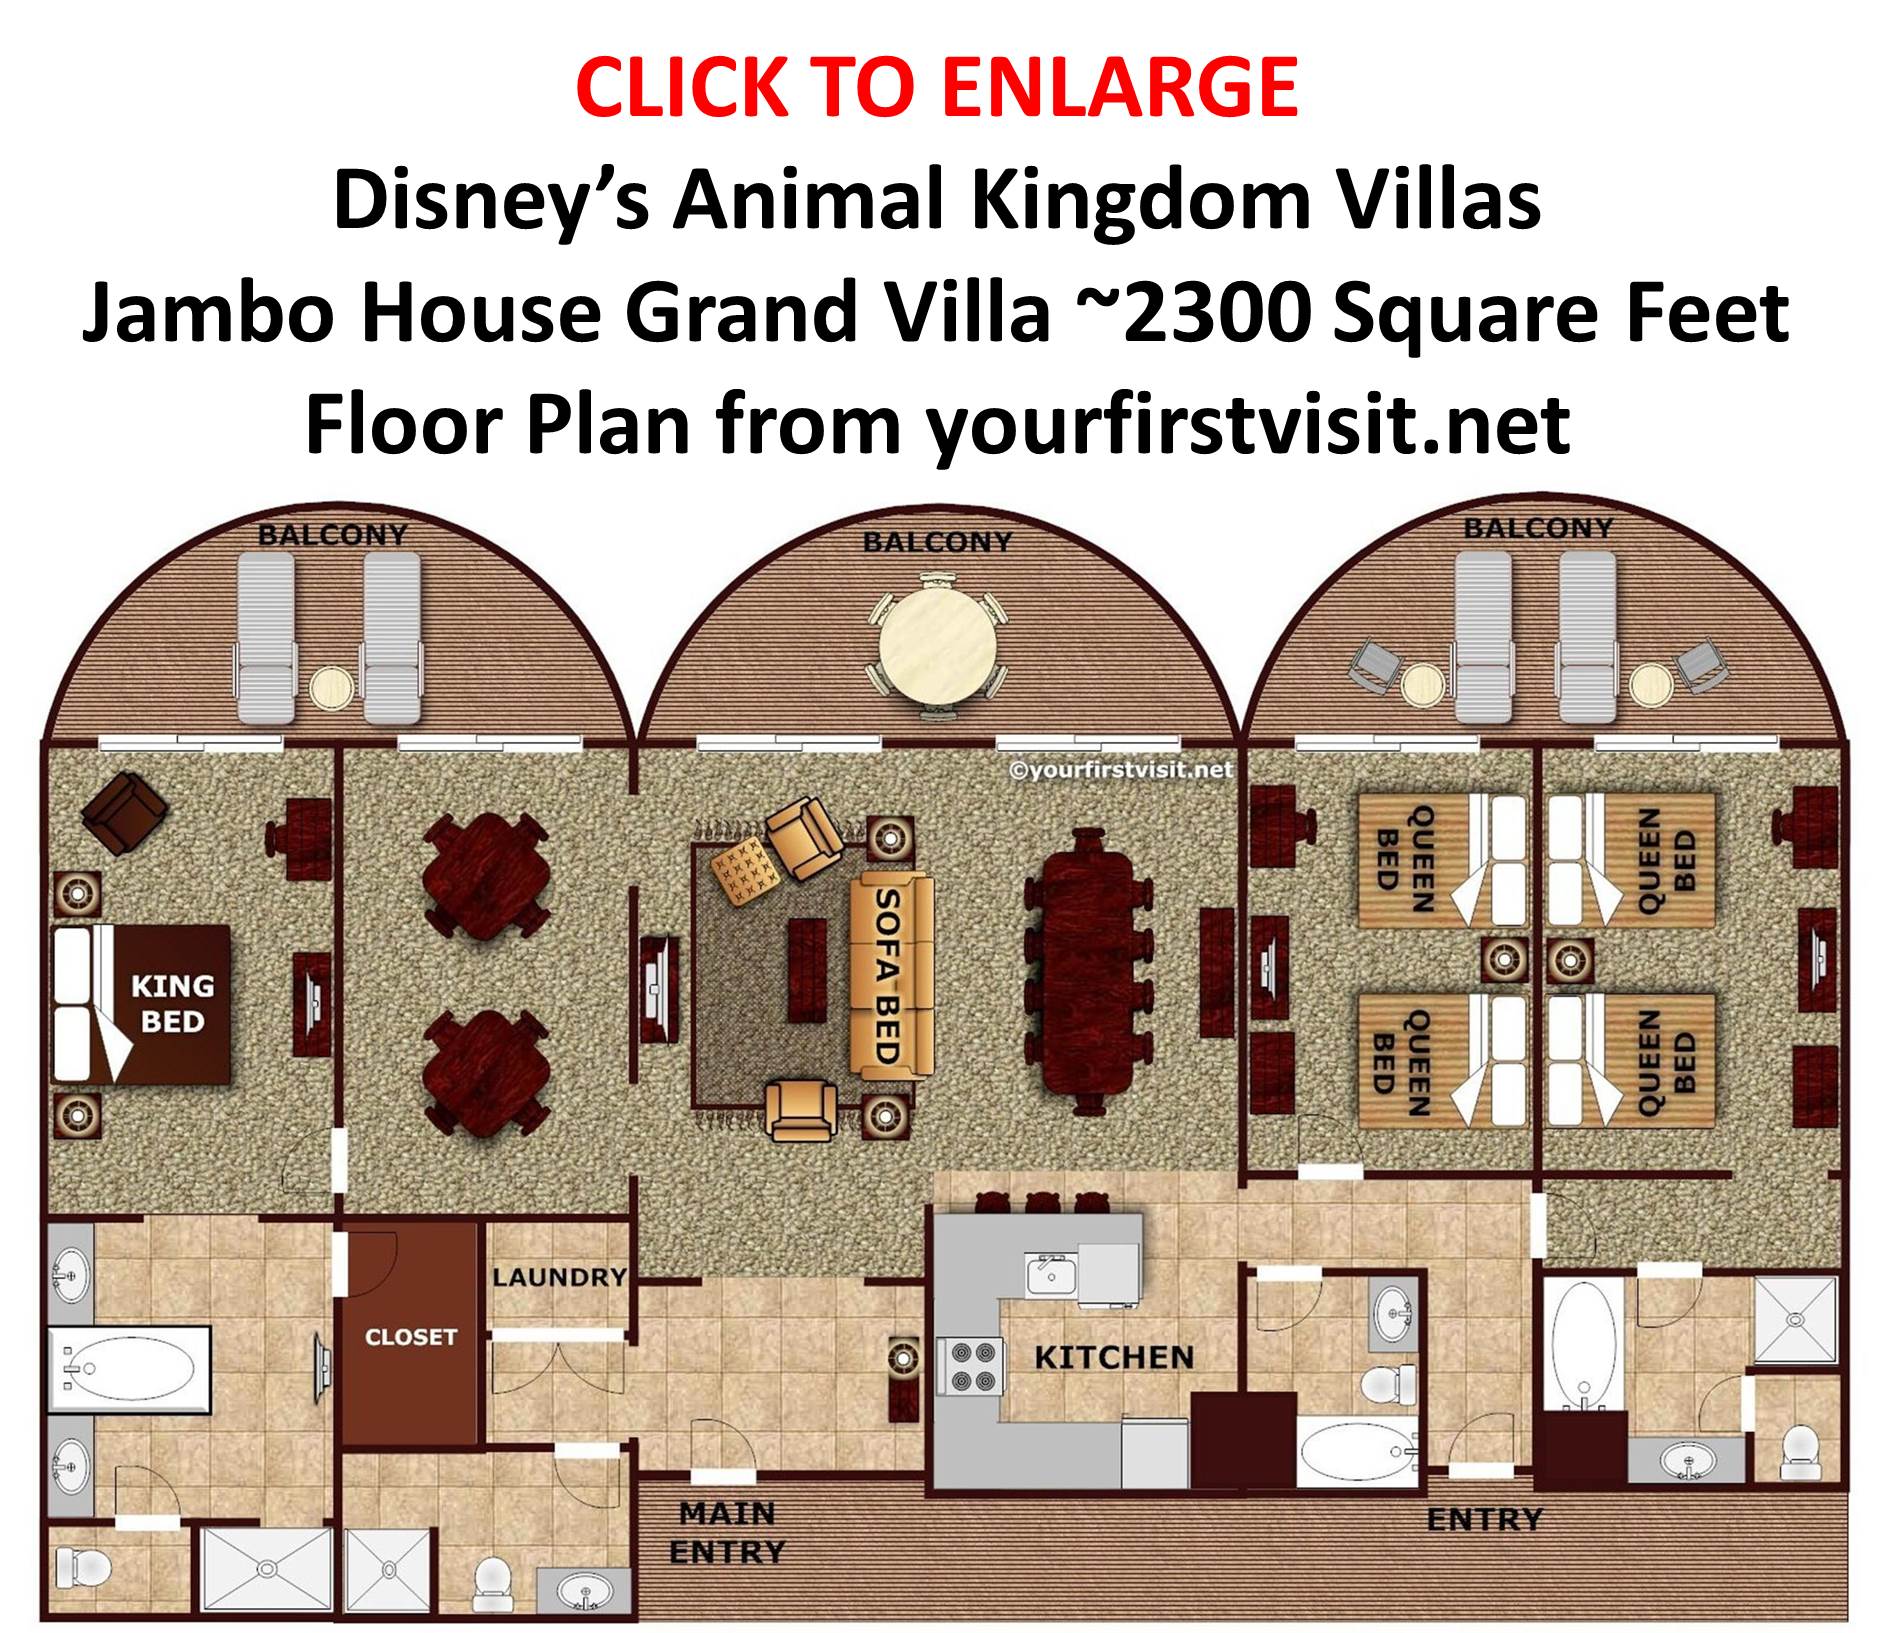 Sleeping Space Options And Bed Types At Walt Disney World Resort Hotels Yourfirstvisit Net